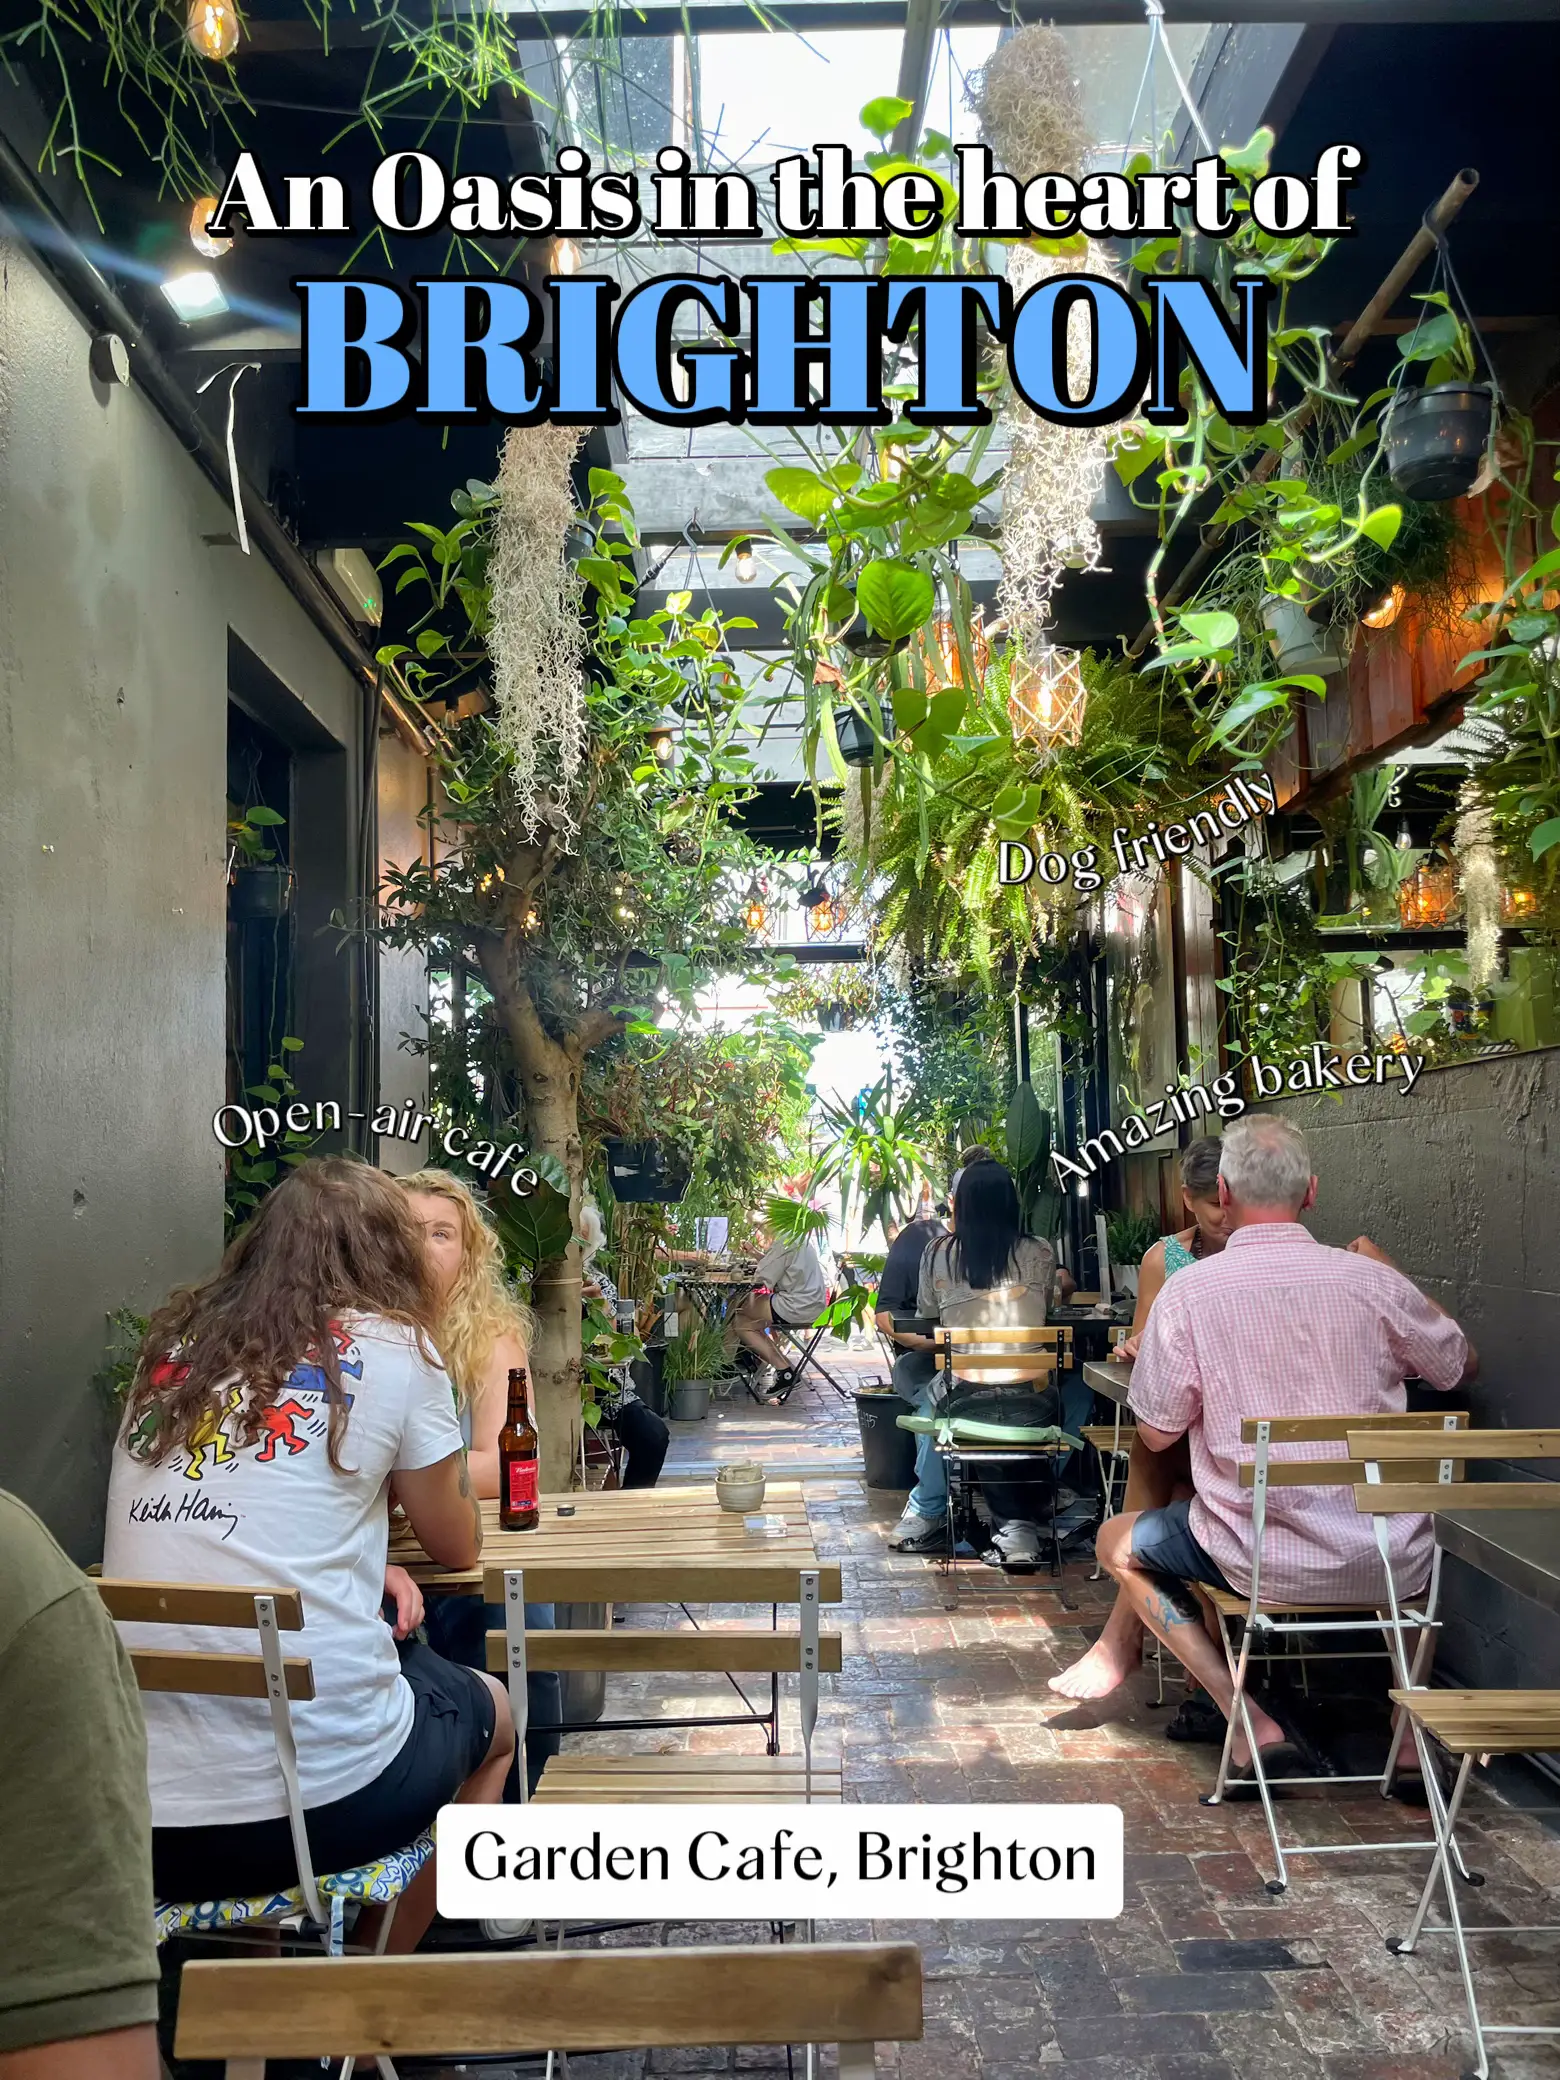 An oasis in the heart of Brighton ☕️🍄🍅🧀 | Gallery posted by ...